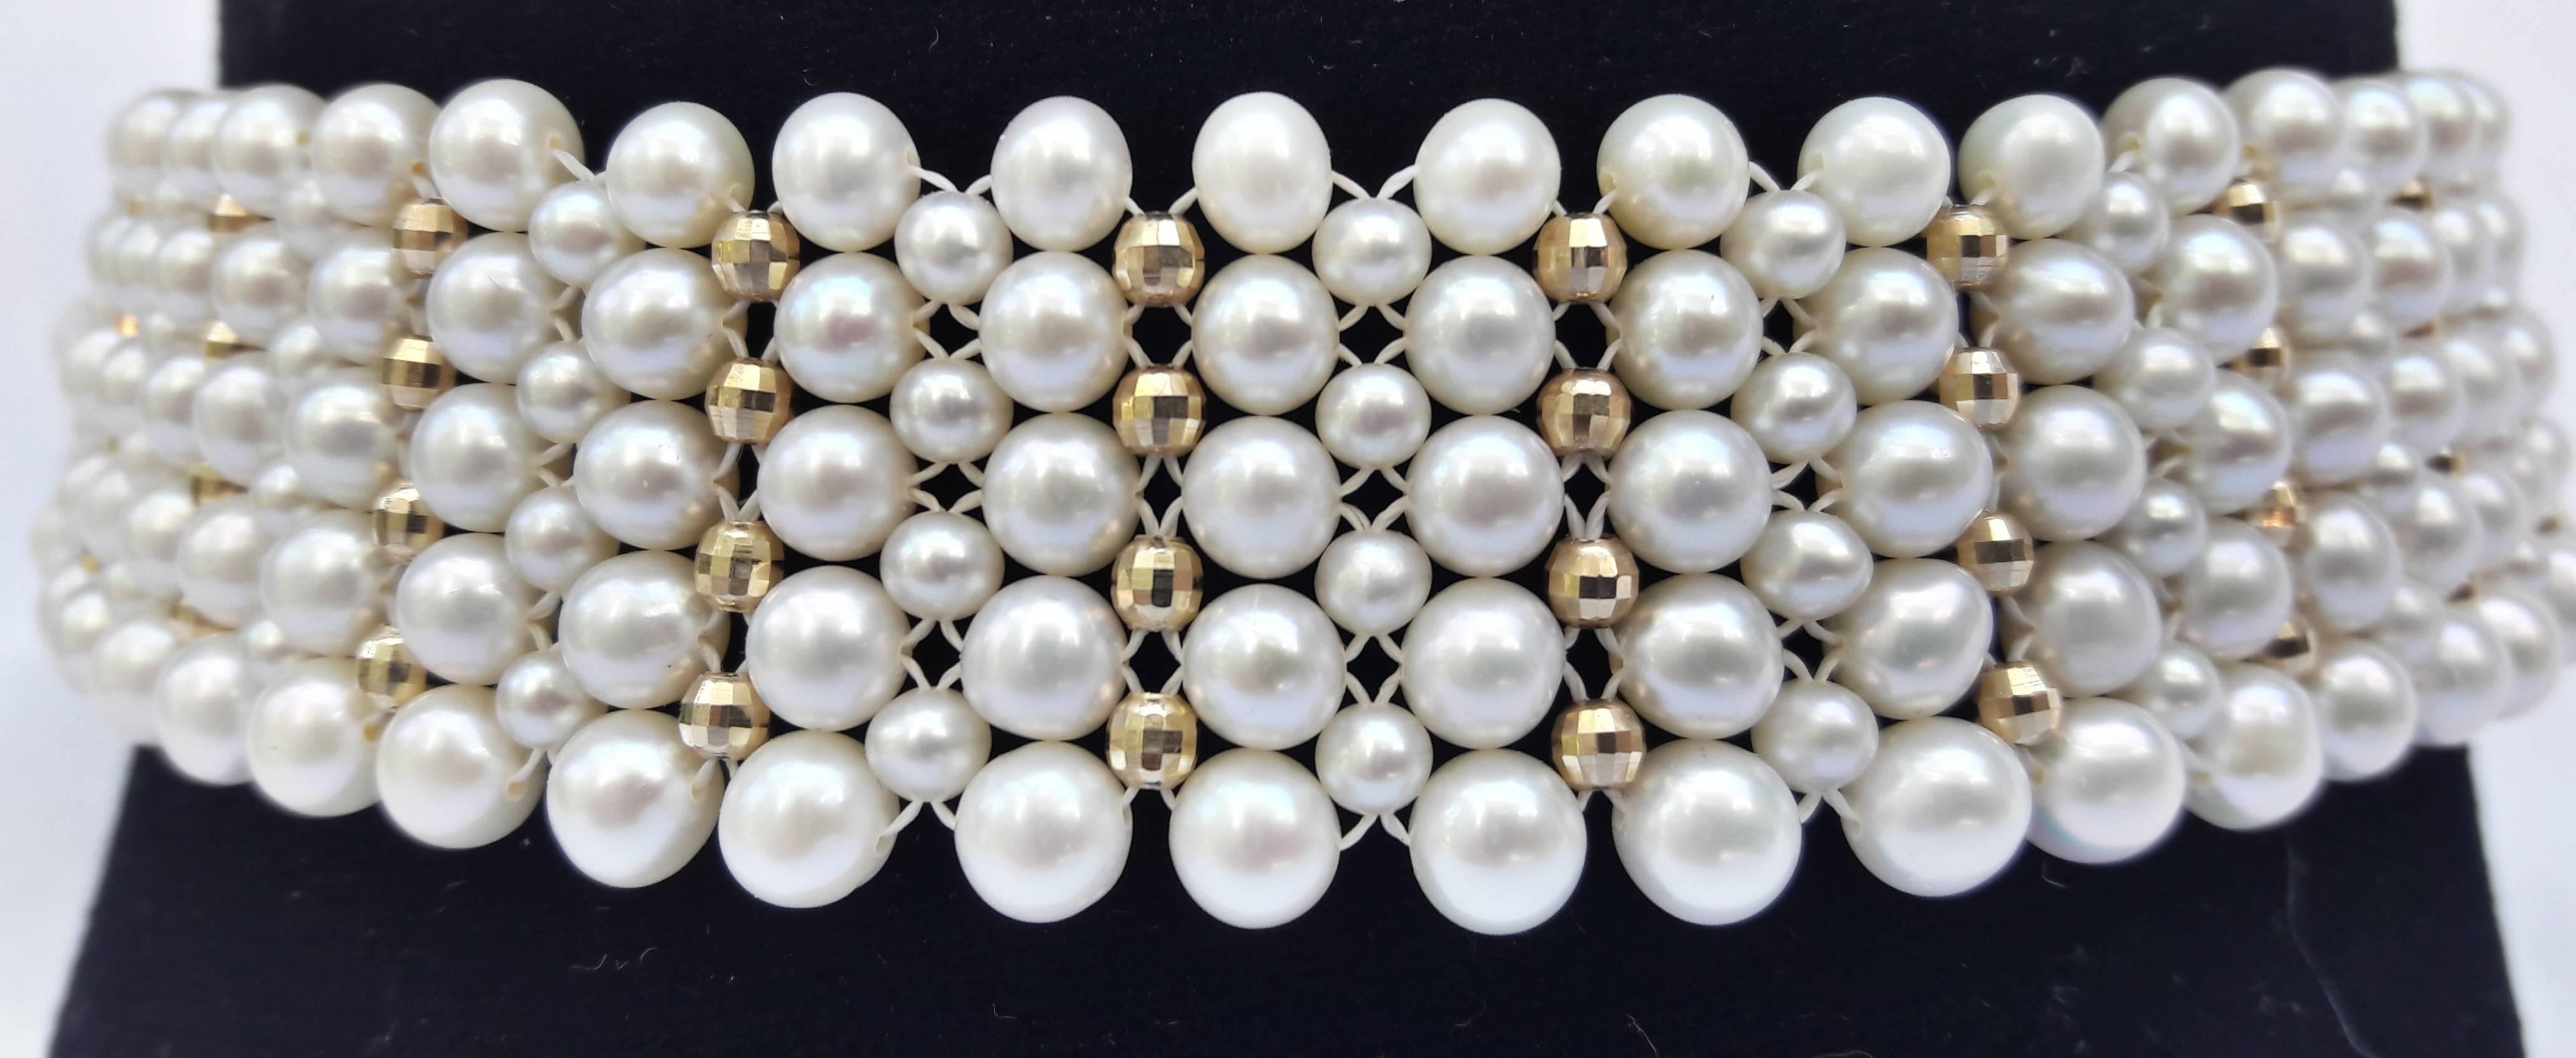 Woven Pearl Choker with Gold Faceted Beads and Adjustable Gold Clasp 1